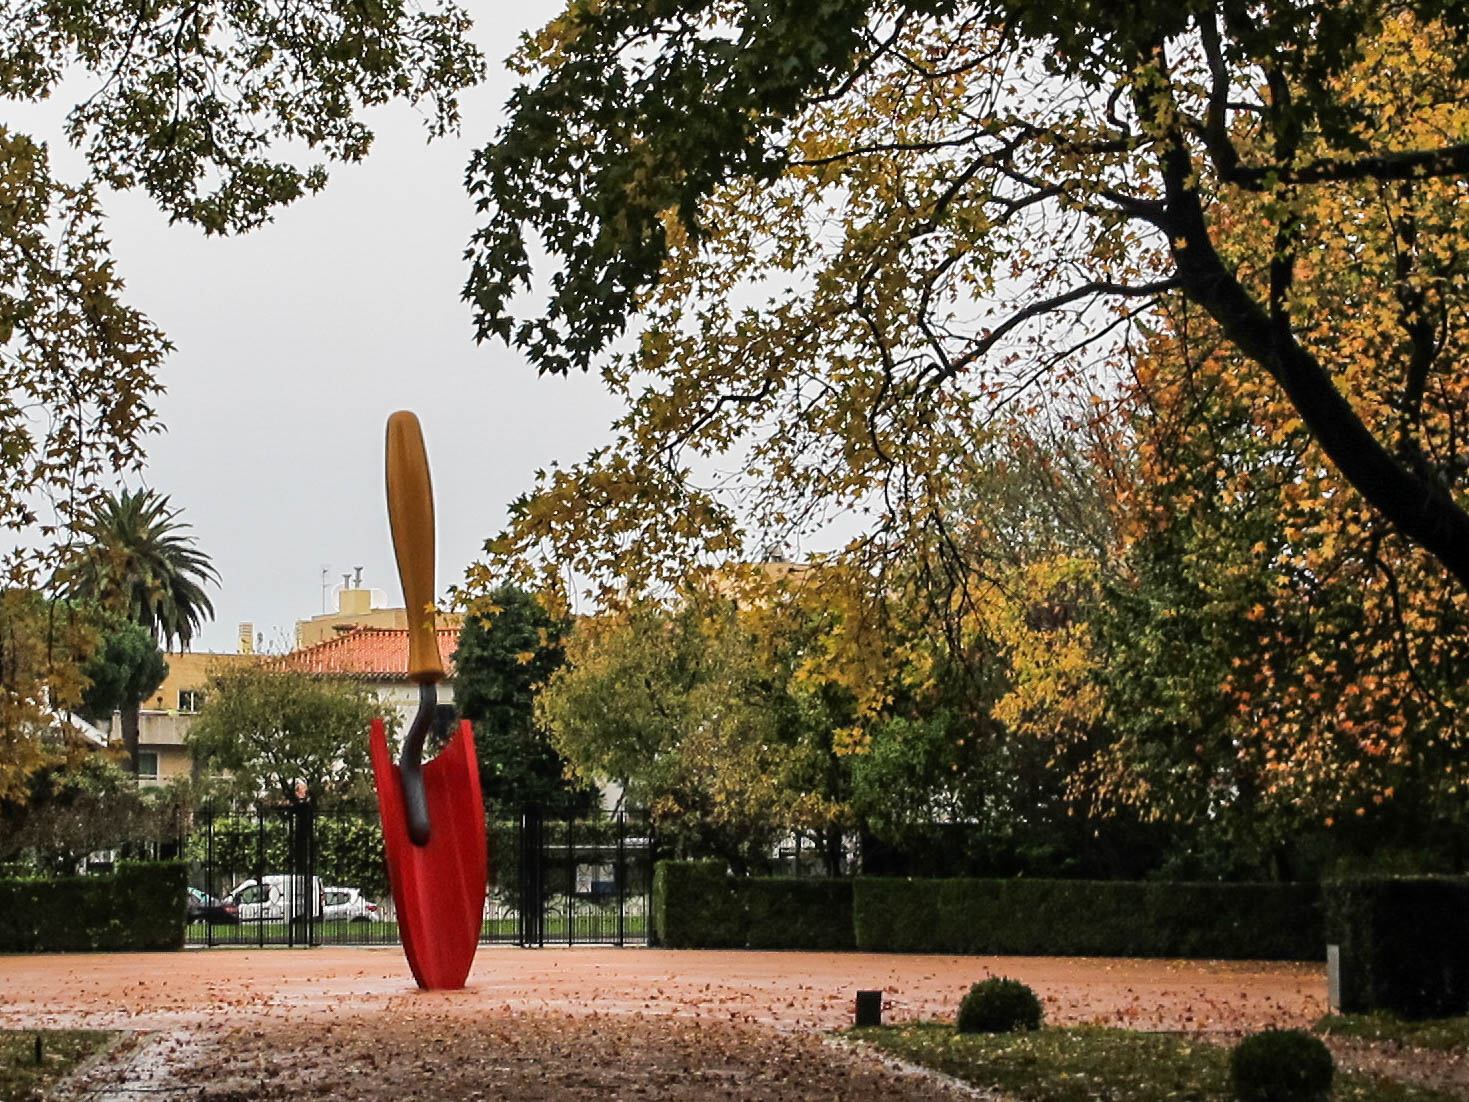 A red trowel stands at the entrance of the park